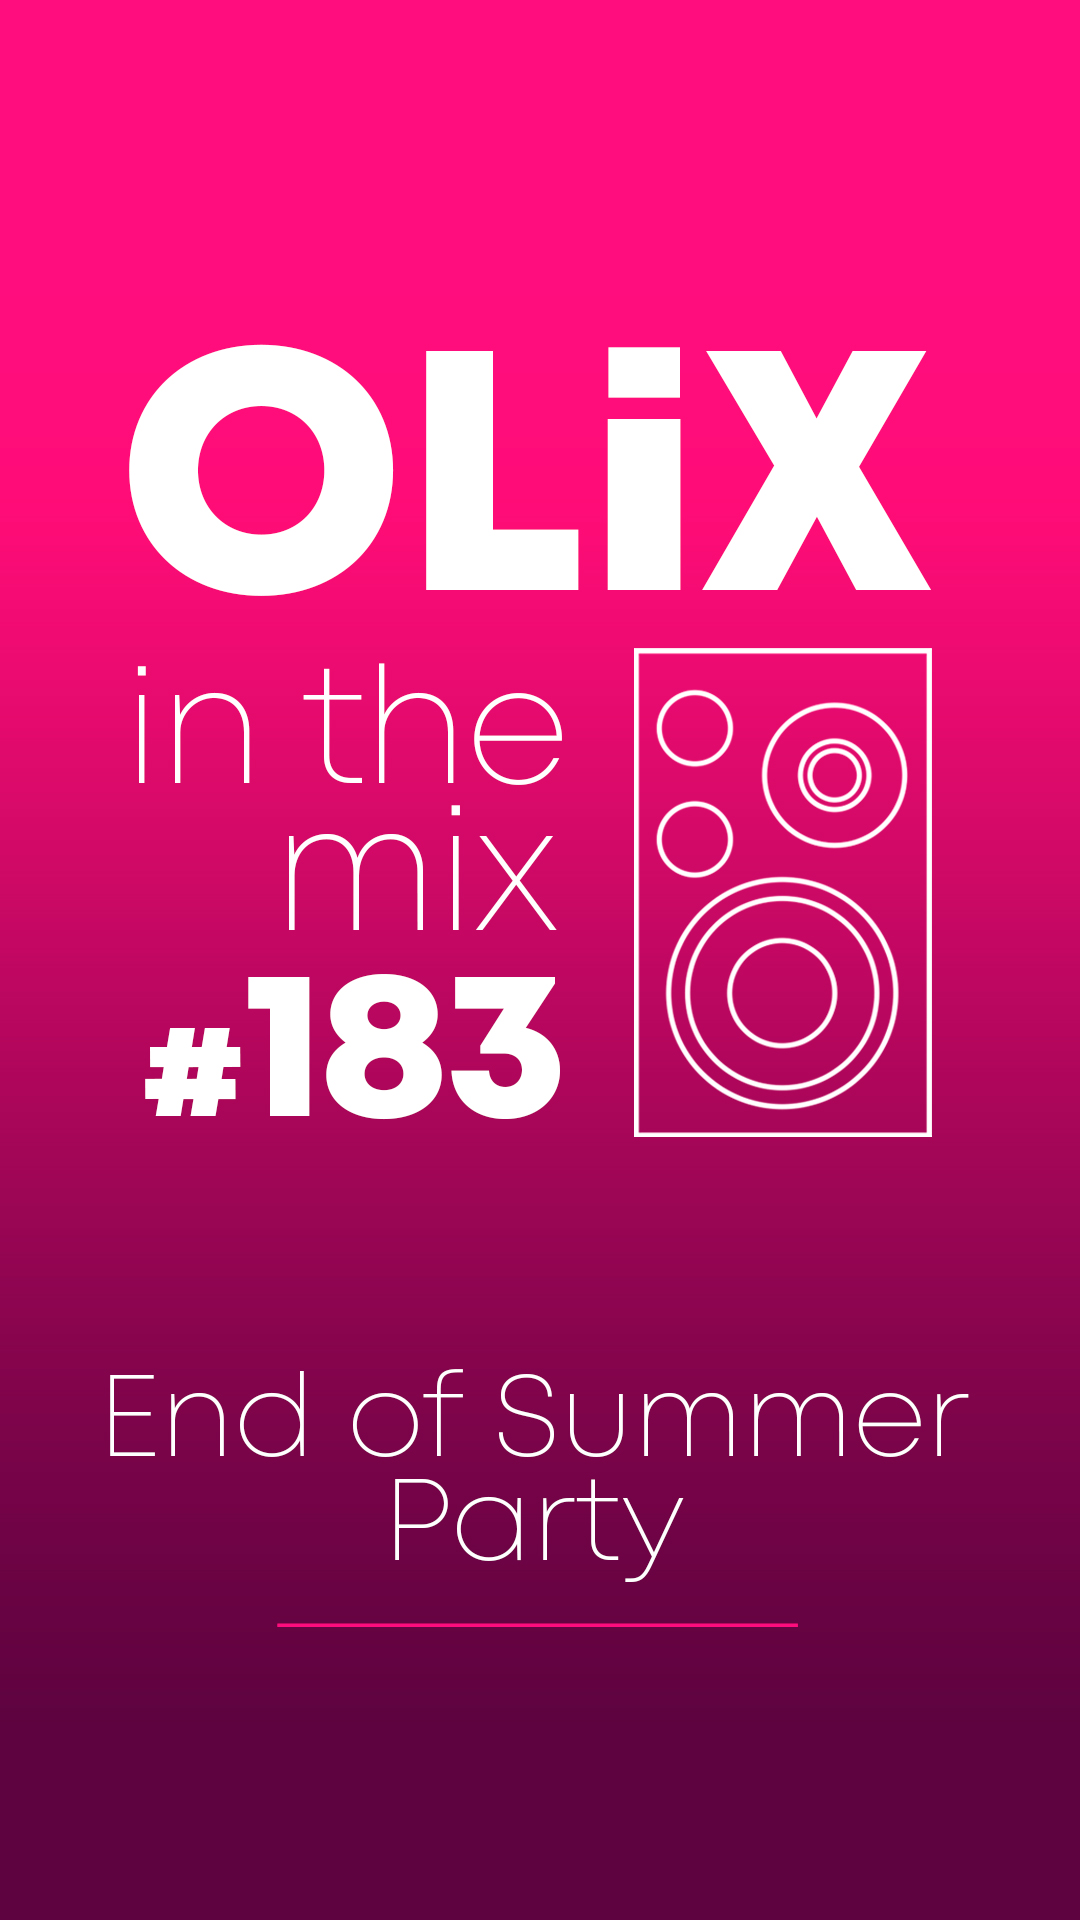 OLiX in the Mix - 183 - End of Summer Party